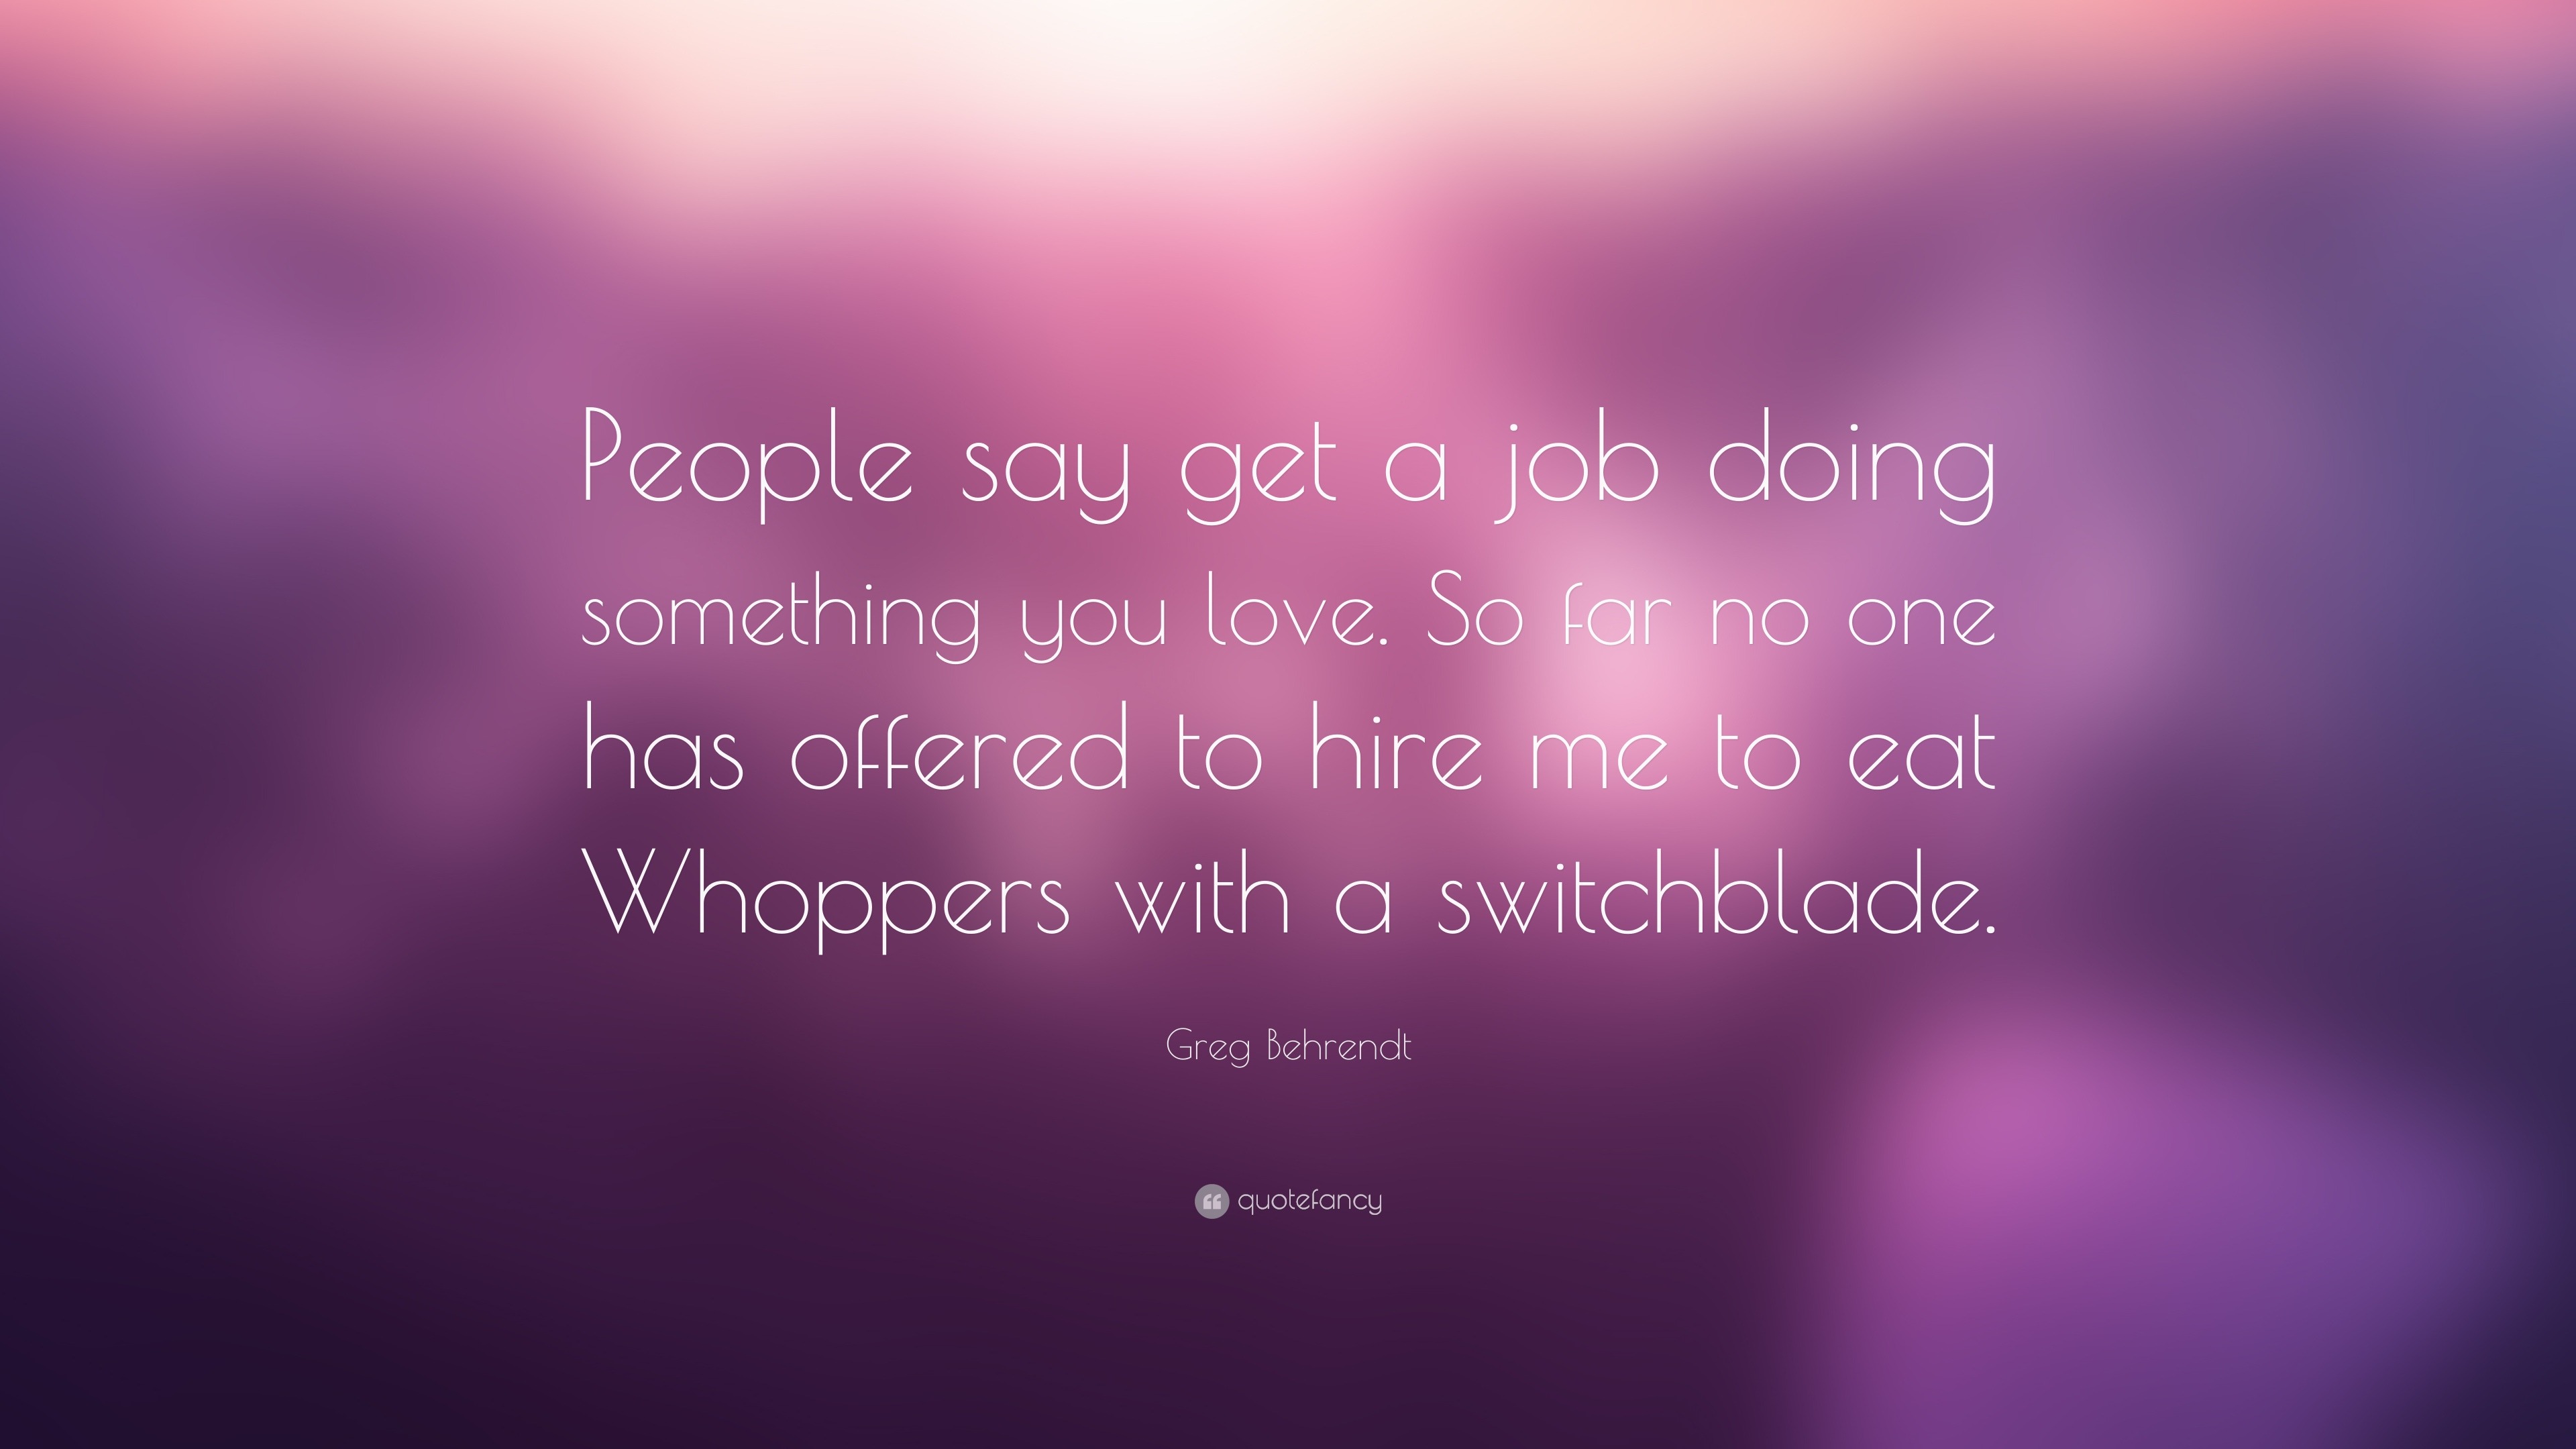 Greg Behrendt Quote “People say a job doing something you love So